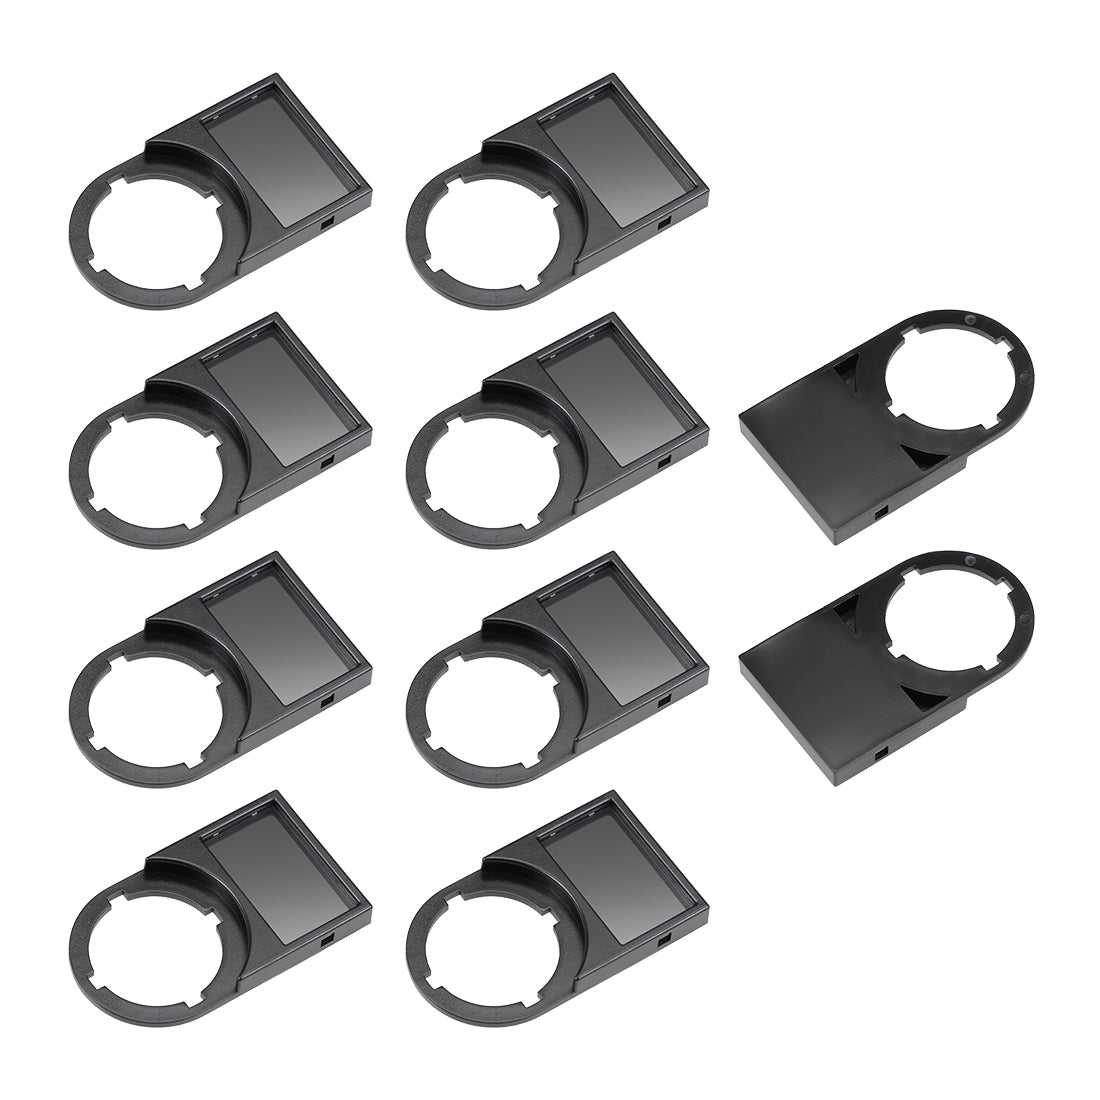 Uxcell Uxcell 10pcs 22mm Diameter Black Plastic Push Button Switch Notice Board Dust-Proof 25x11mm Lens